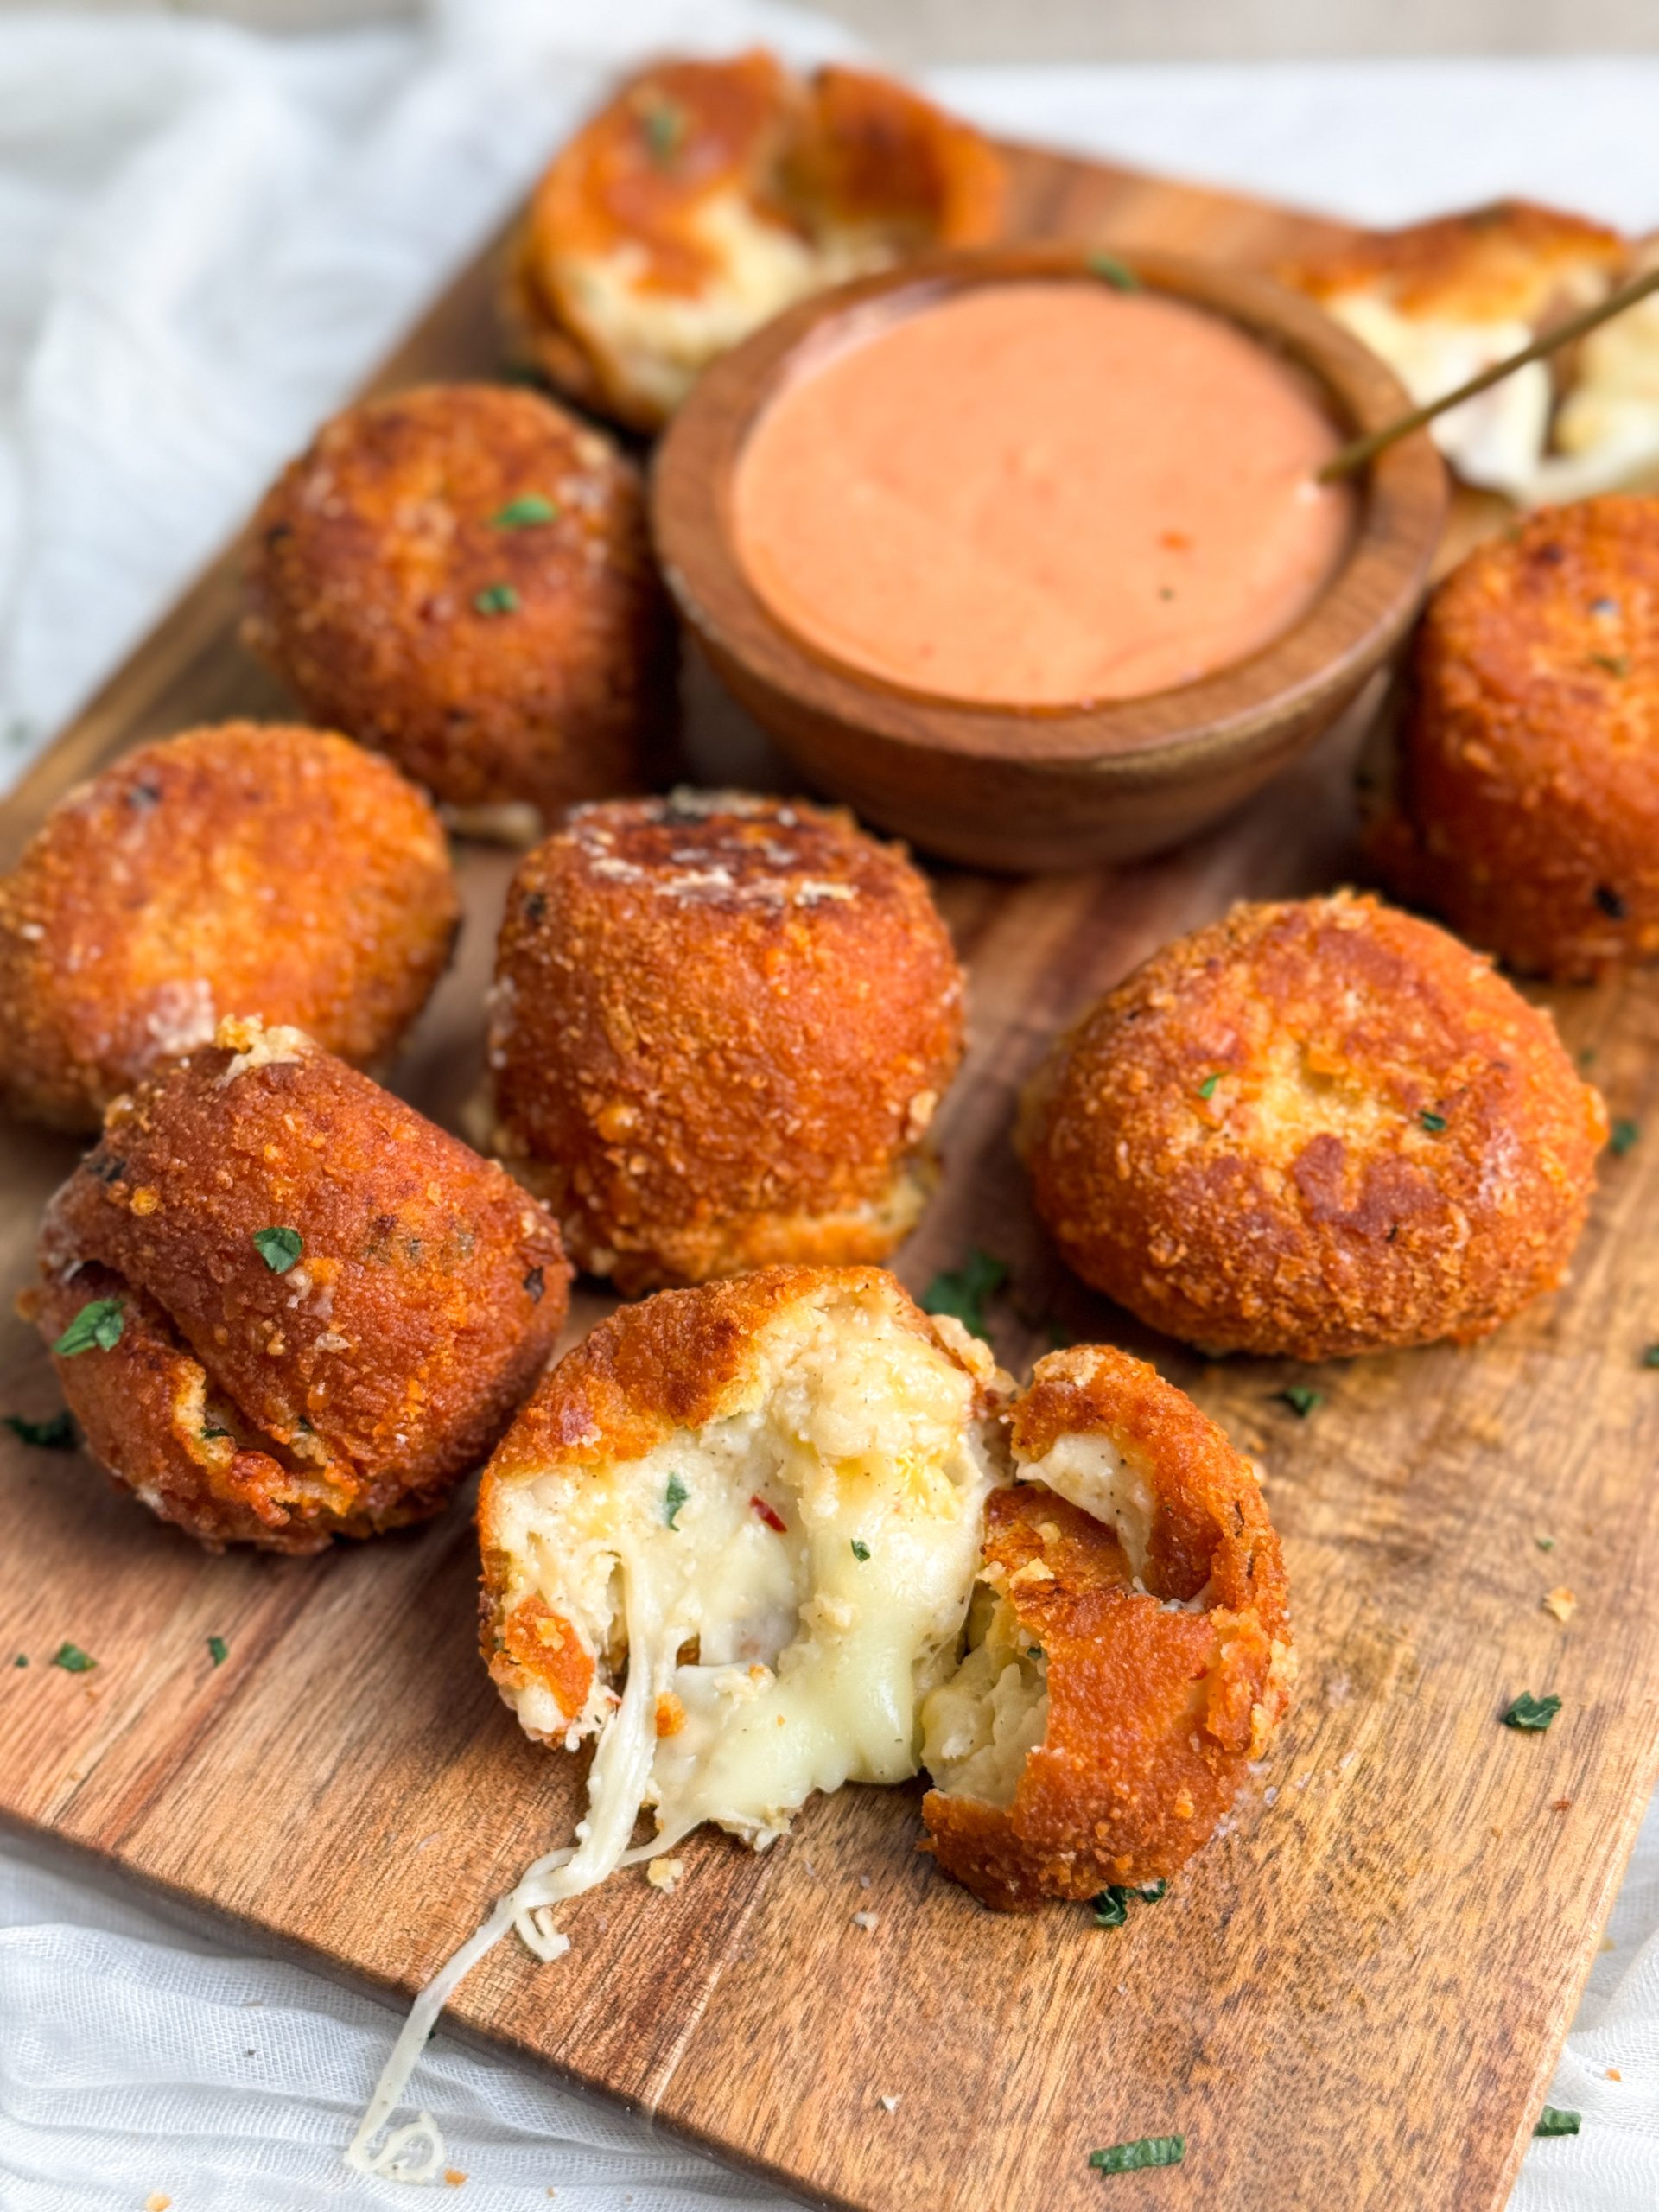 crispy fried mashed potato balls on a cutting board, one ball is broken in half to show soft cheesy middle. balls are golden brown and crispy. small bowl with sauce on the side. picture from an angle